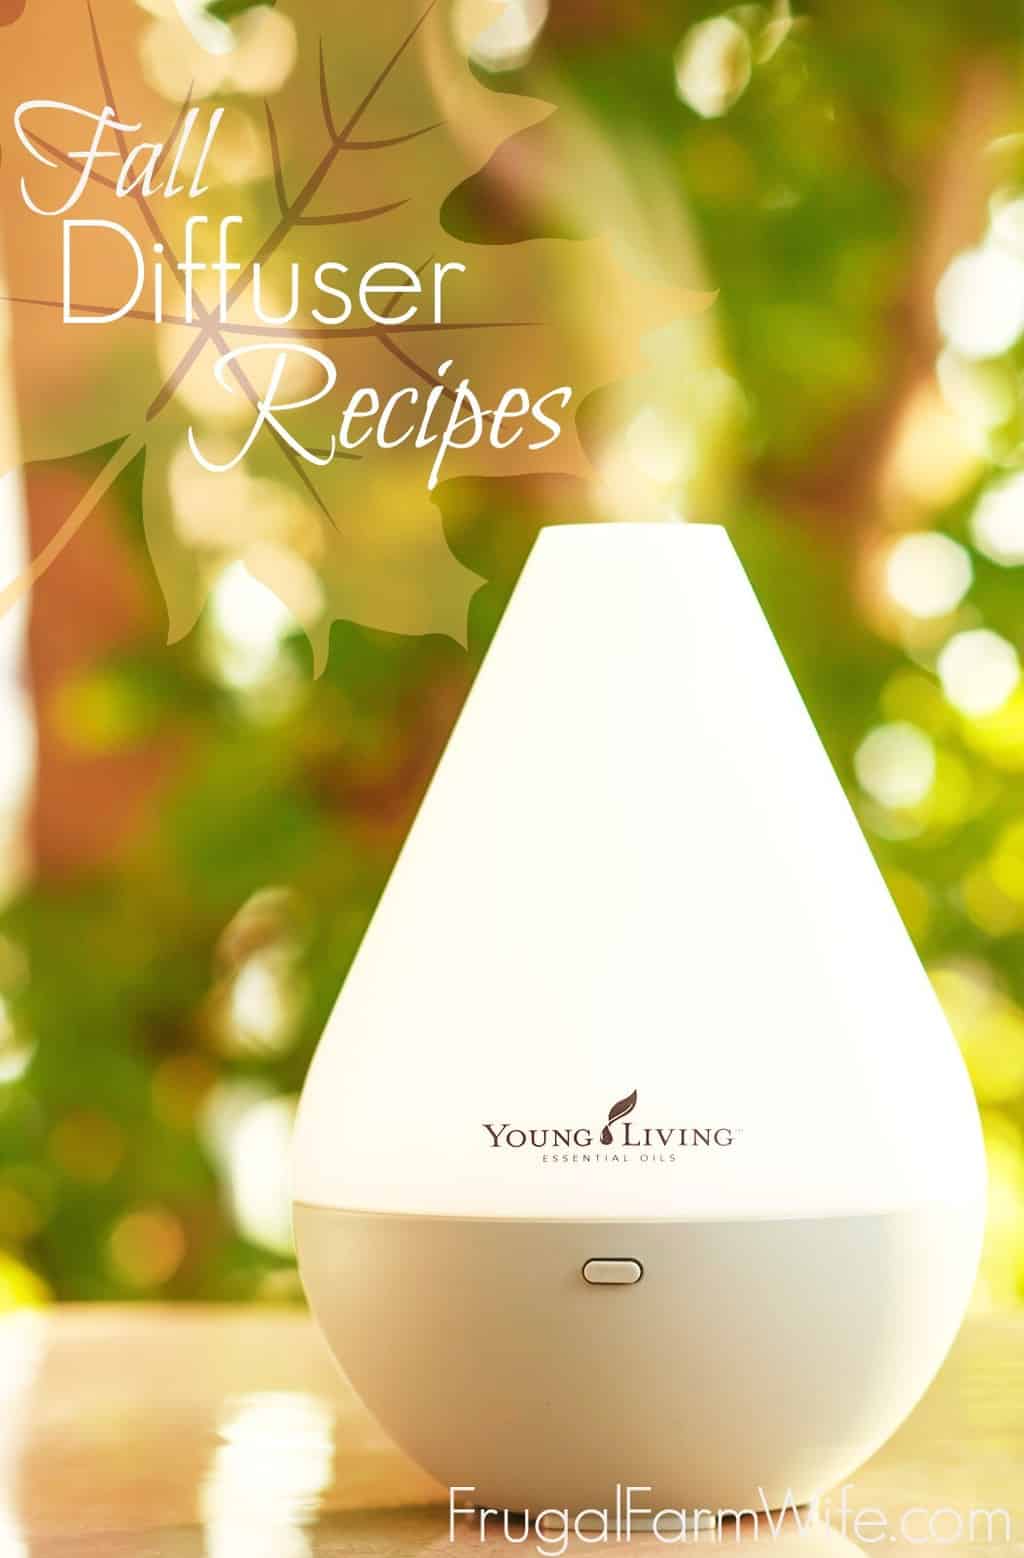 These Fall diffuser blends will make your house smell amazing!